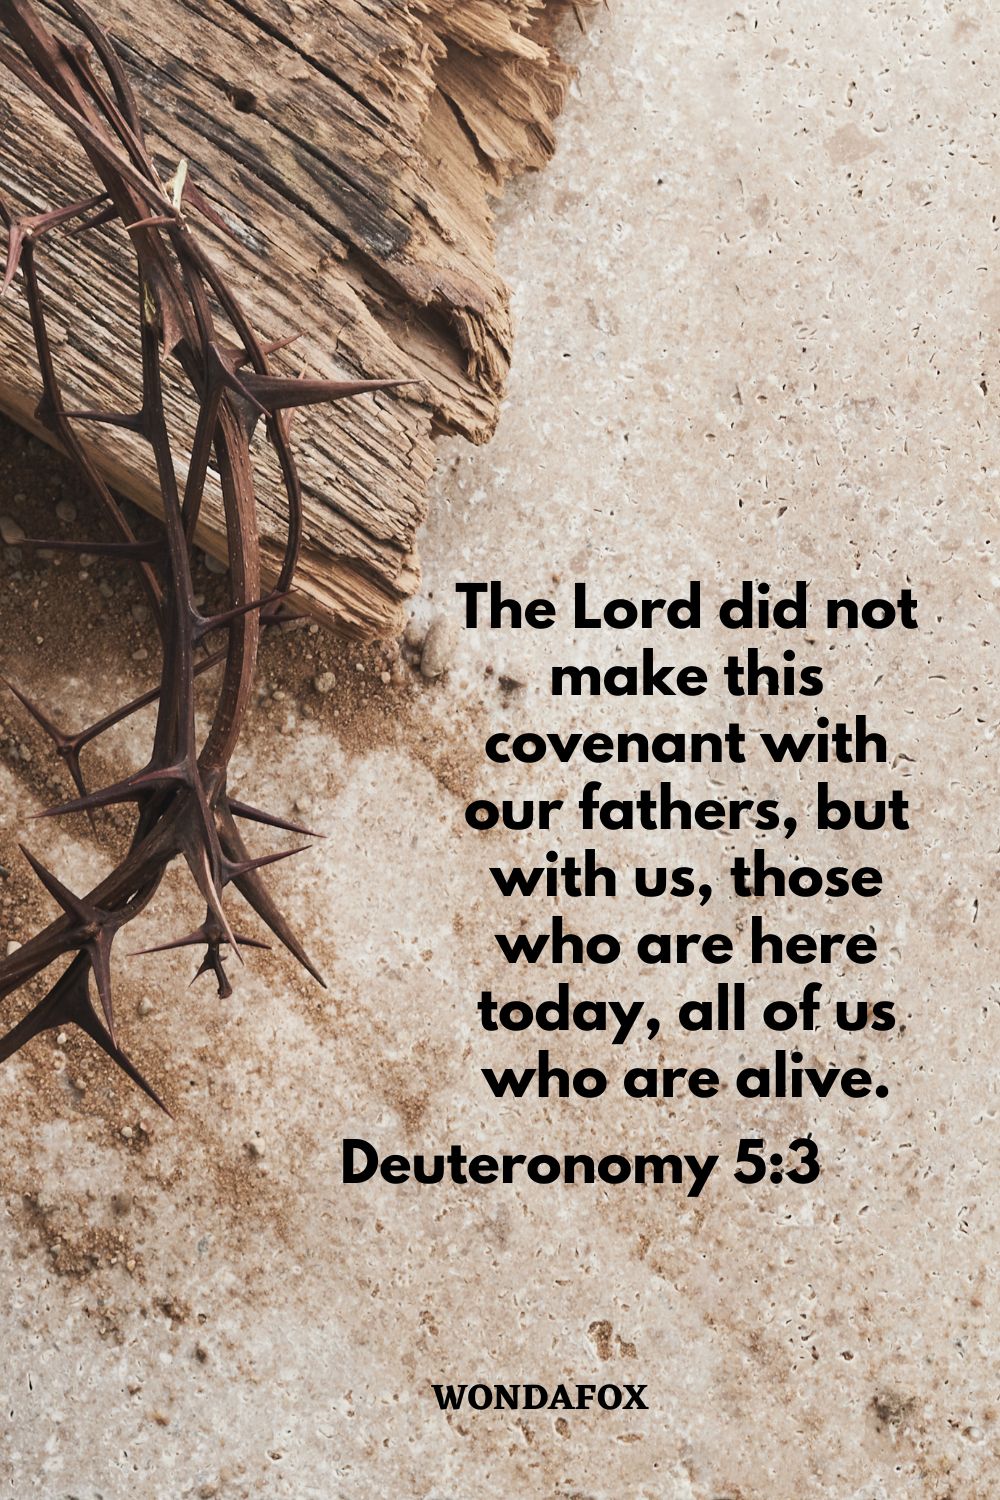 The Lord did not make this covenant with our fathers, but with us, those who are here today, all of us who are alive.
Deuteronomy 5:3